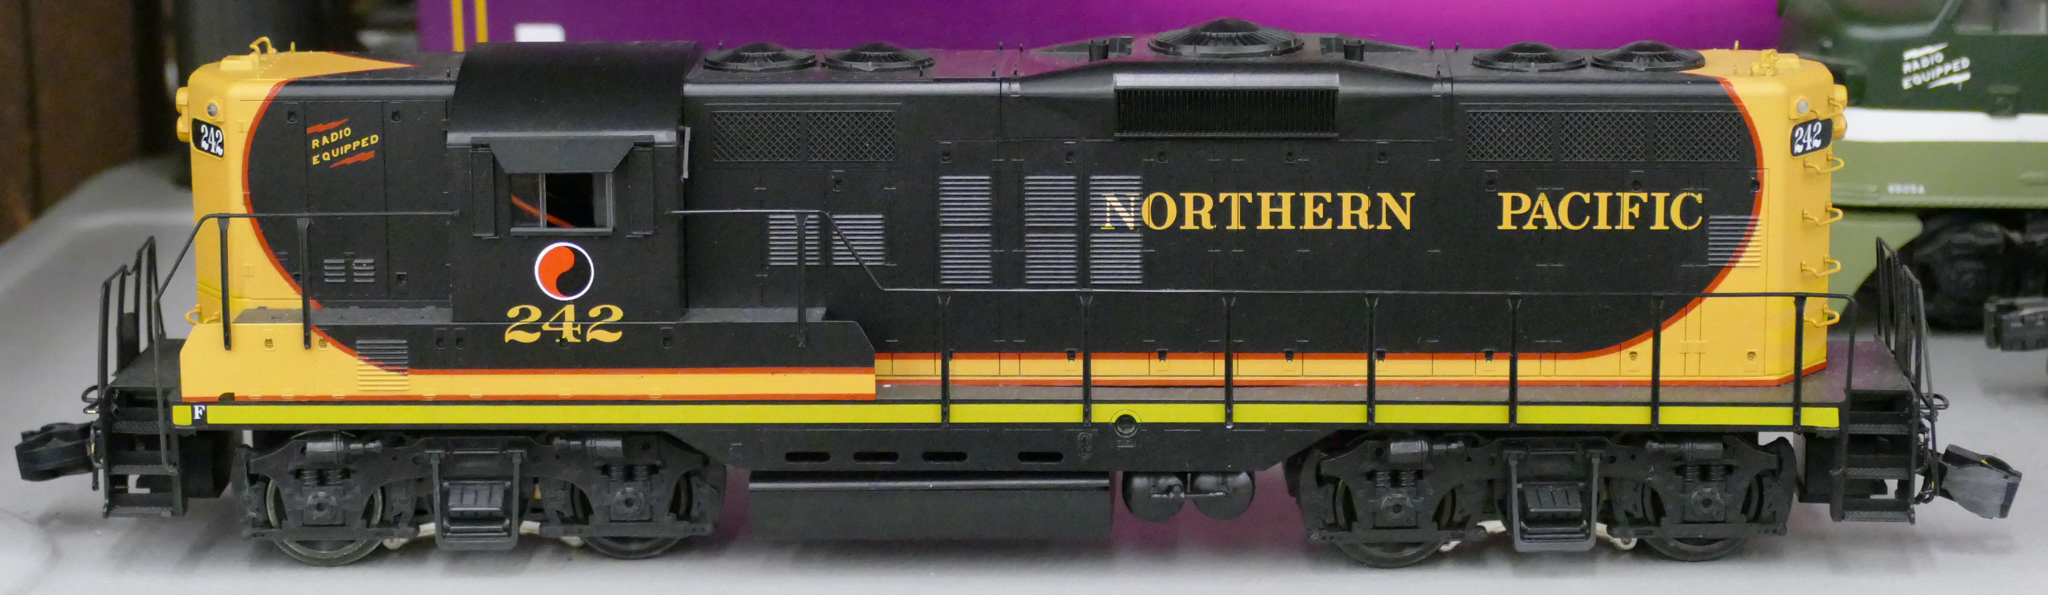 Red Caboose GP-9 Northern Pacific